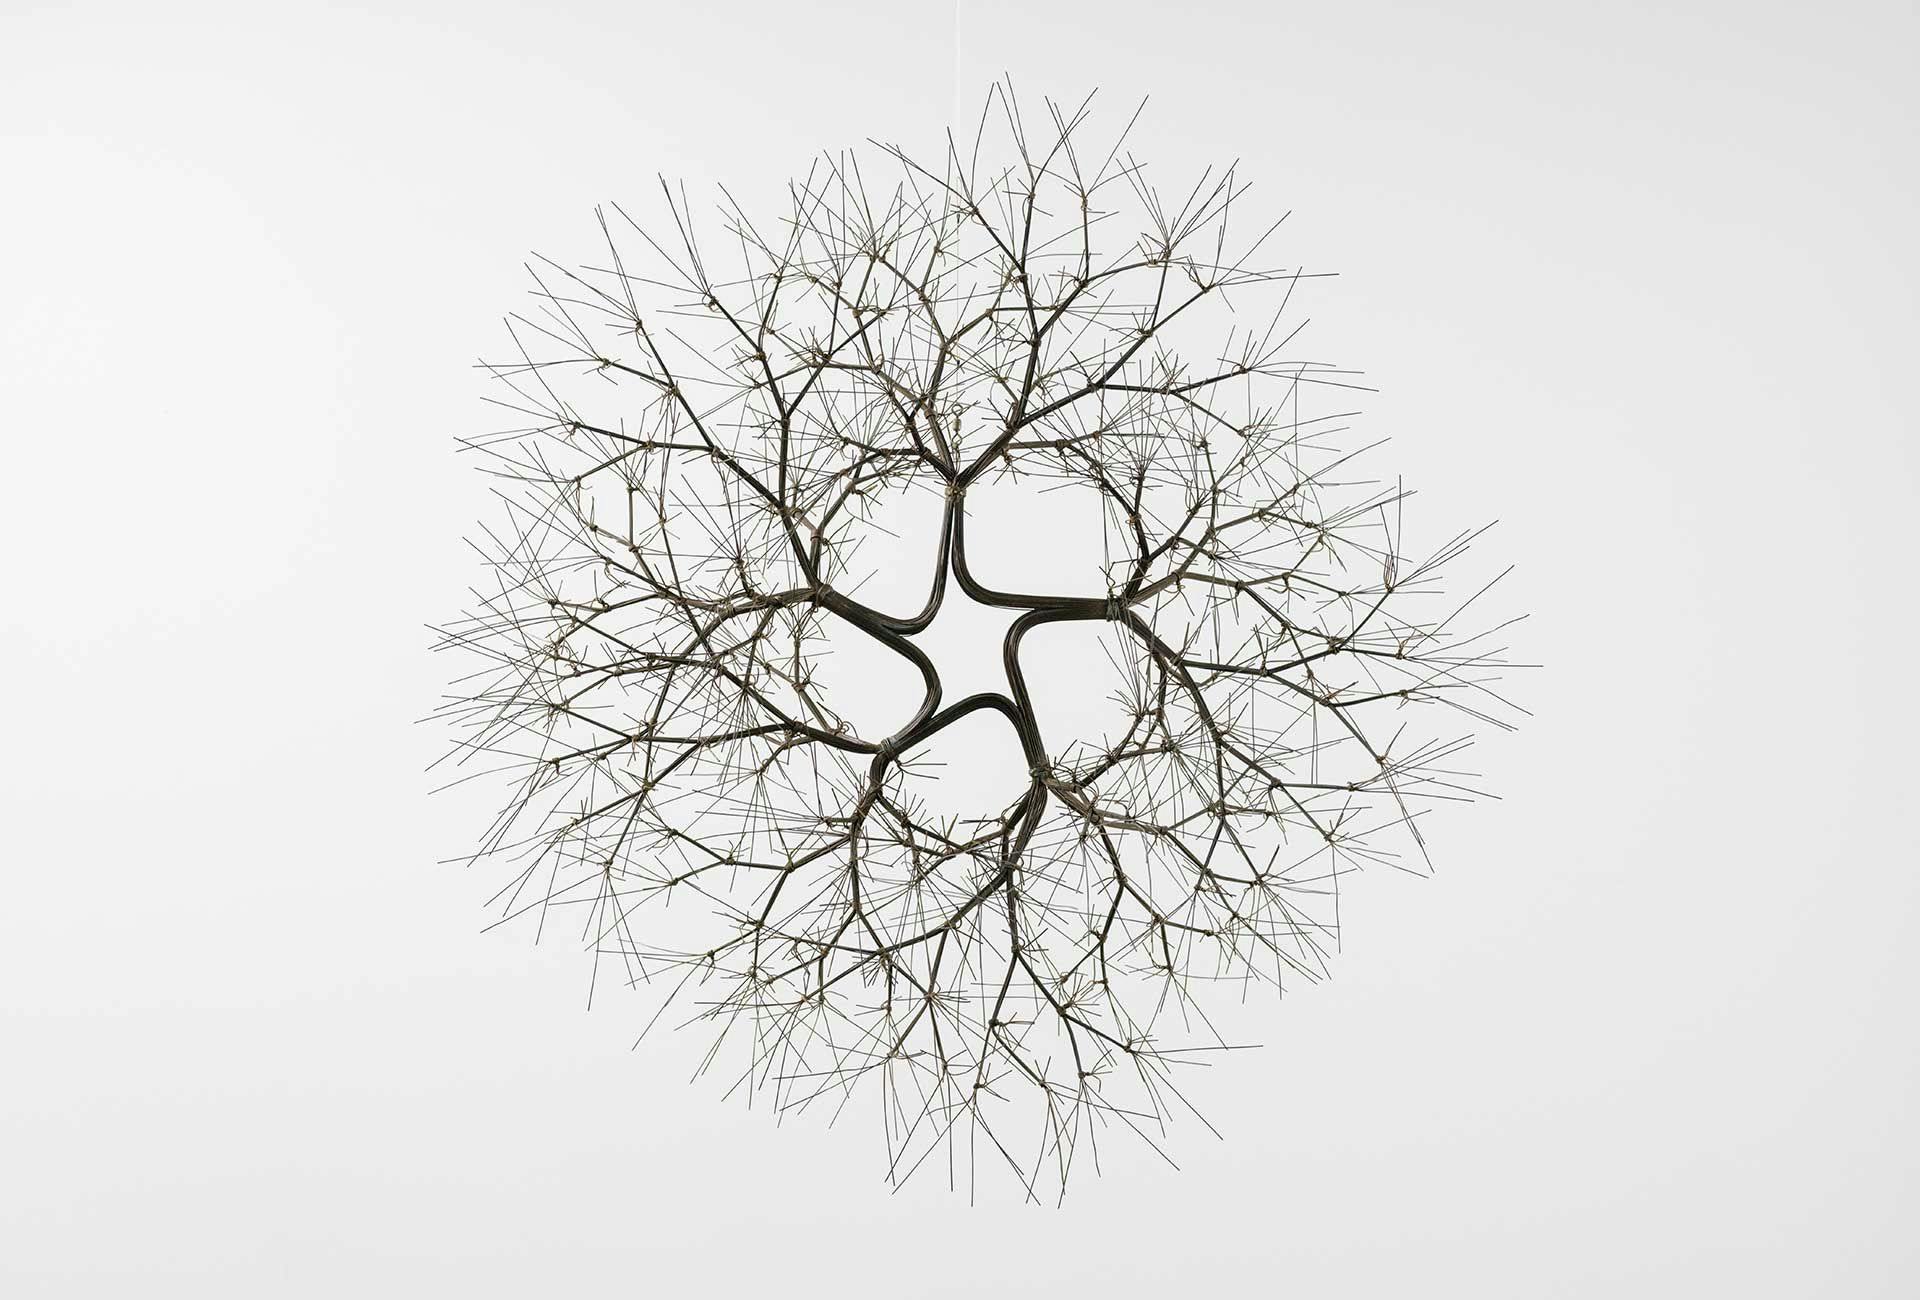 A wall-hanging wire sculpture by Ruth Asawa, titled Untitled (S.452, Hanging Tied-Wire, Five Branched Form Based on Nature), circa 1965.